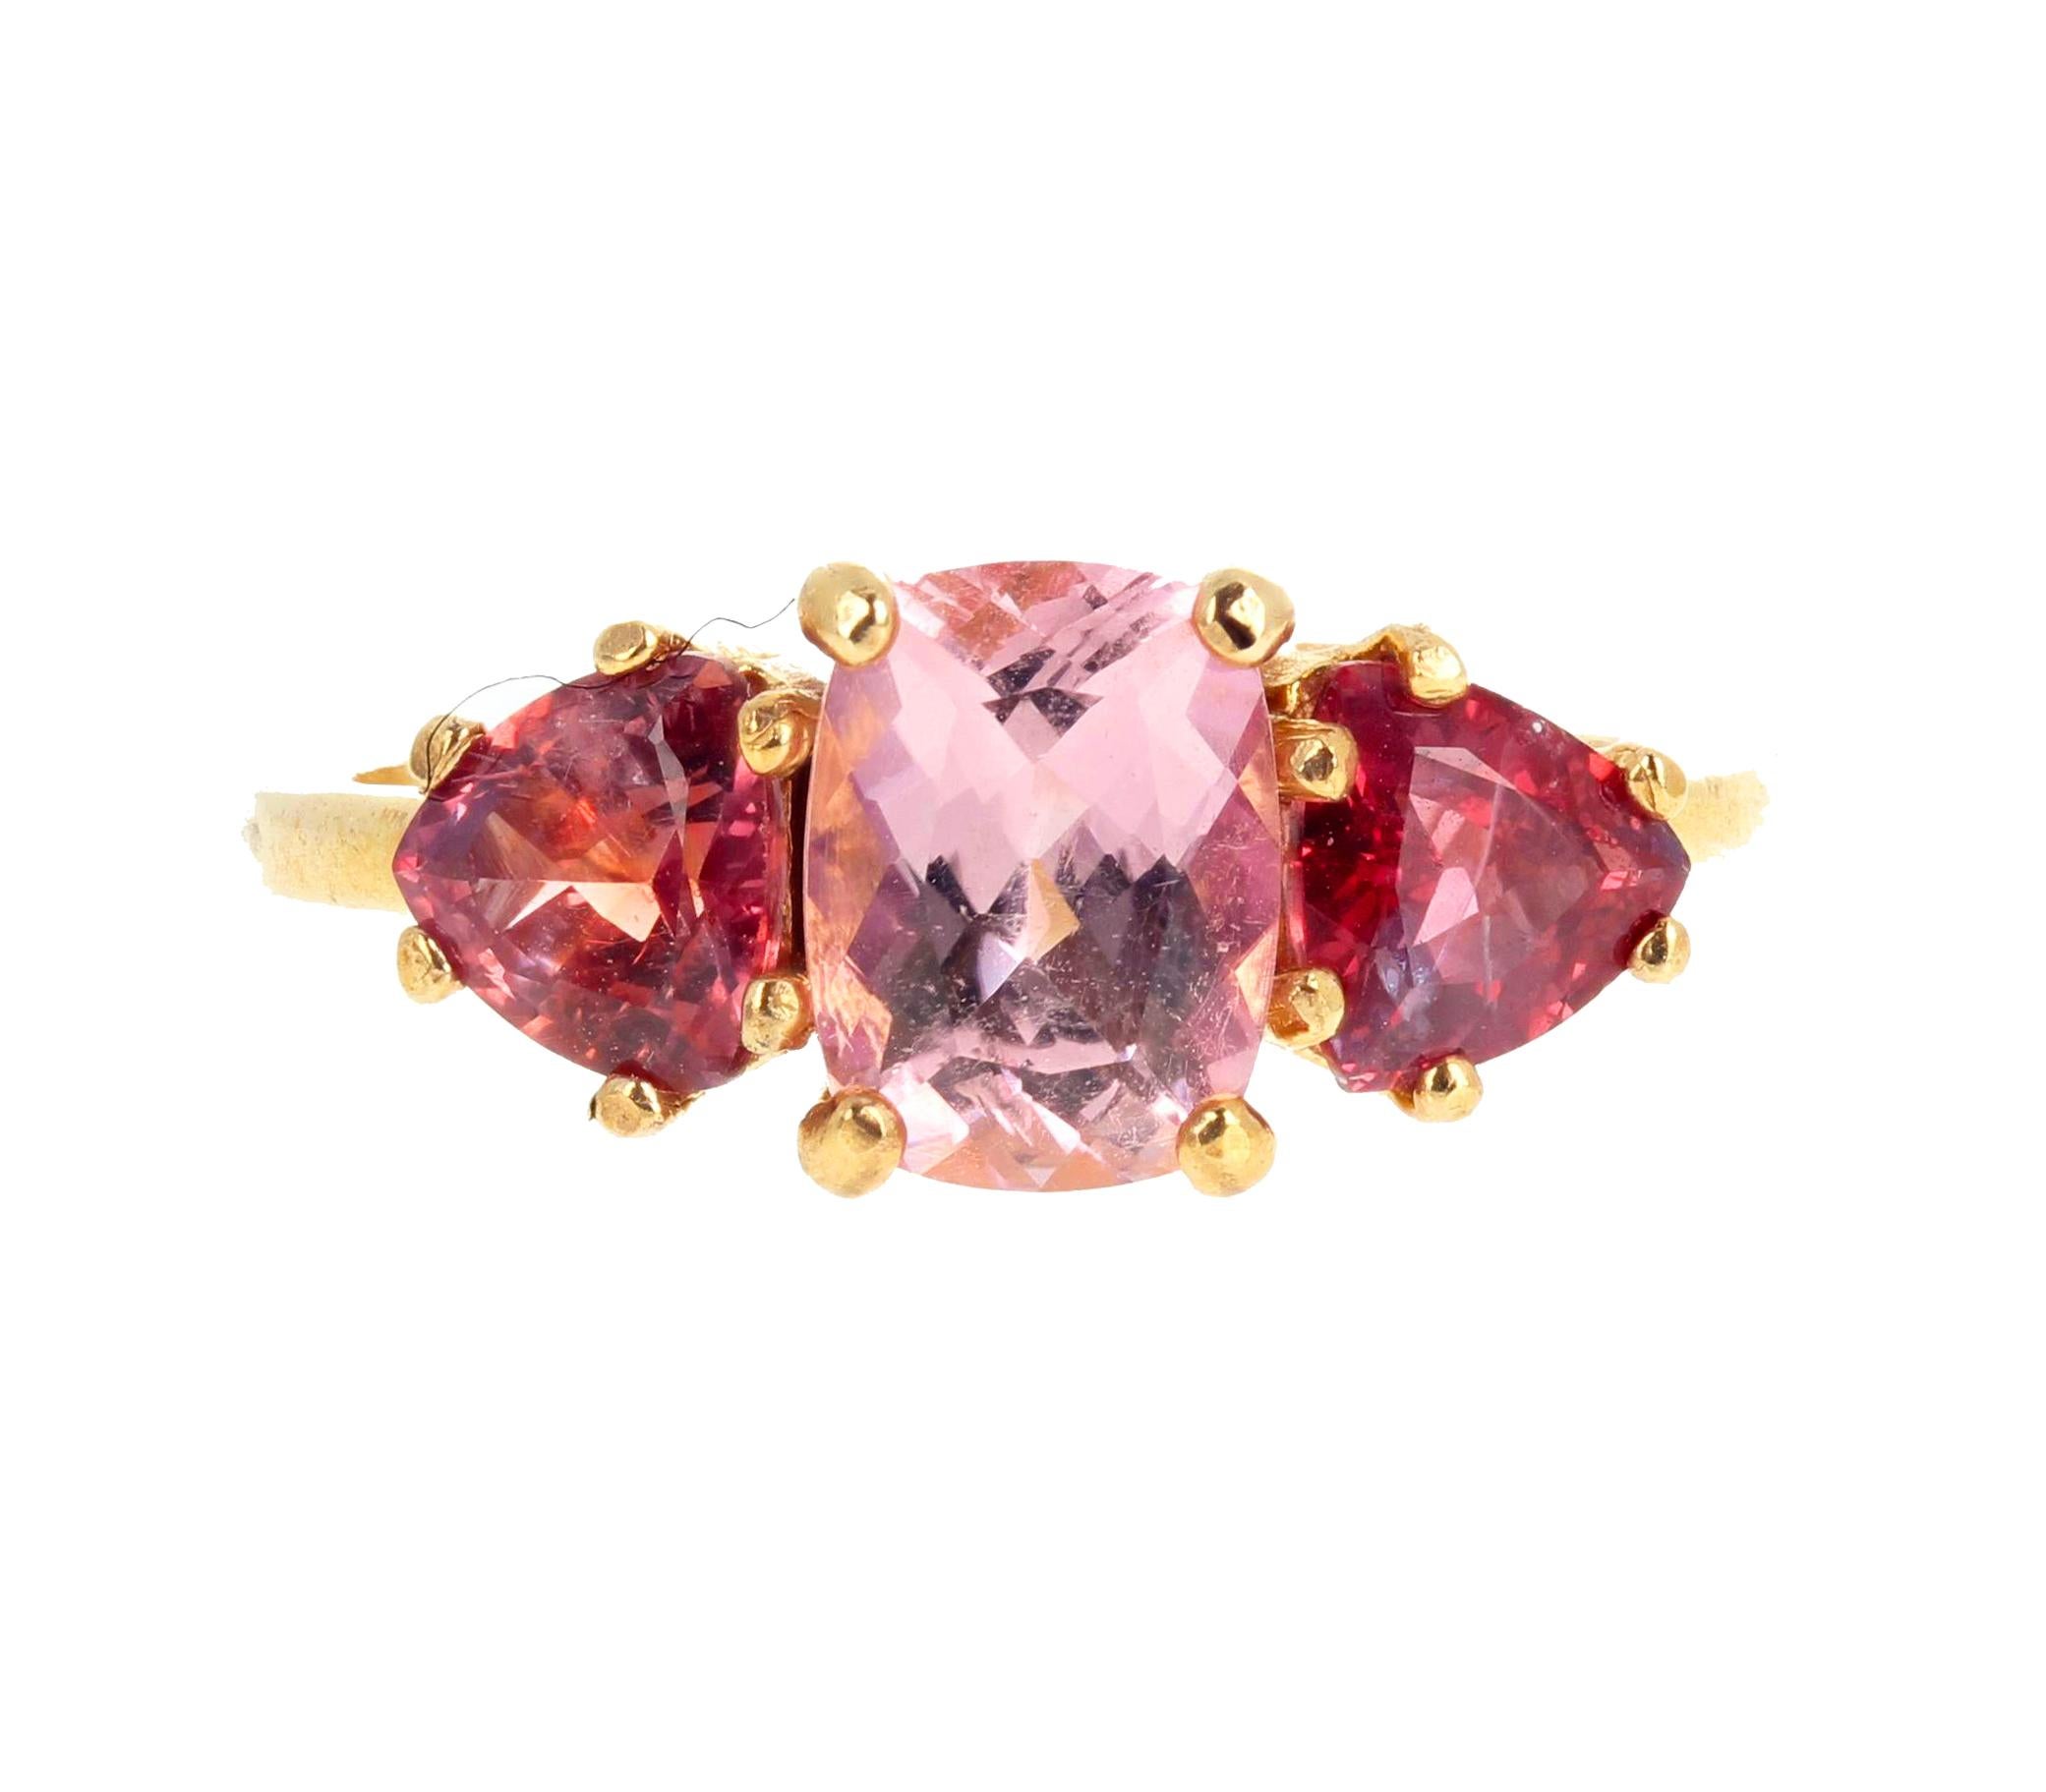 Gorgeous Sri Lankan pink Tourmaline - 1.35 Carats - 8 mm x 6 mm approximately - set with two matching sparkling red natural Spinel trillions set in this lovely 14Kt yellow gold ring size 7 sizable. 